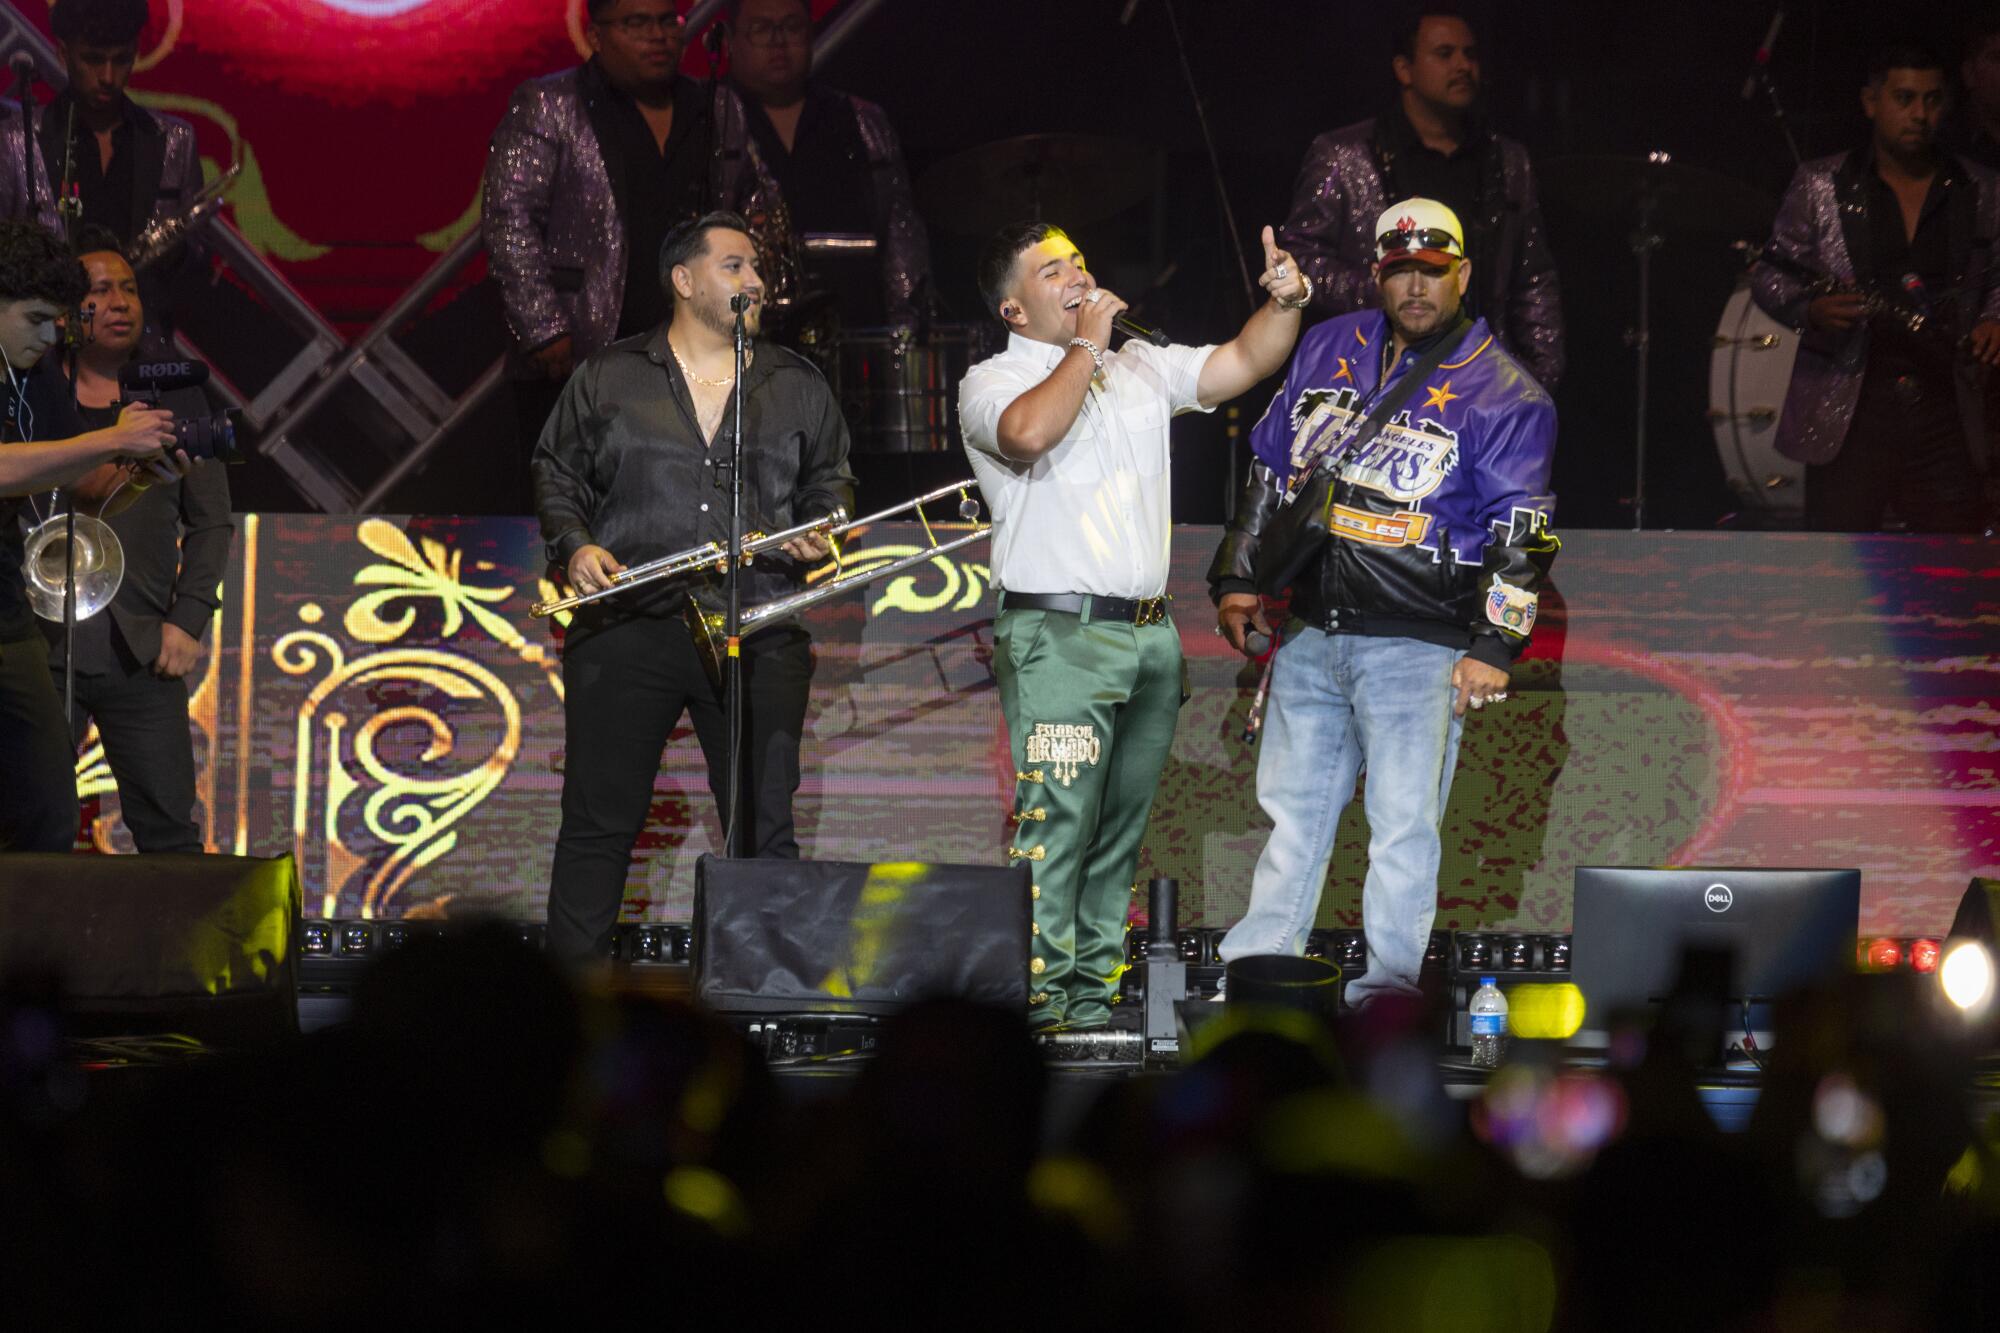 Who are Eslabon Armado? Meet the Mexican musical group who threw